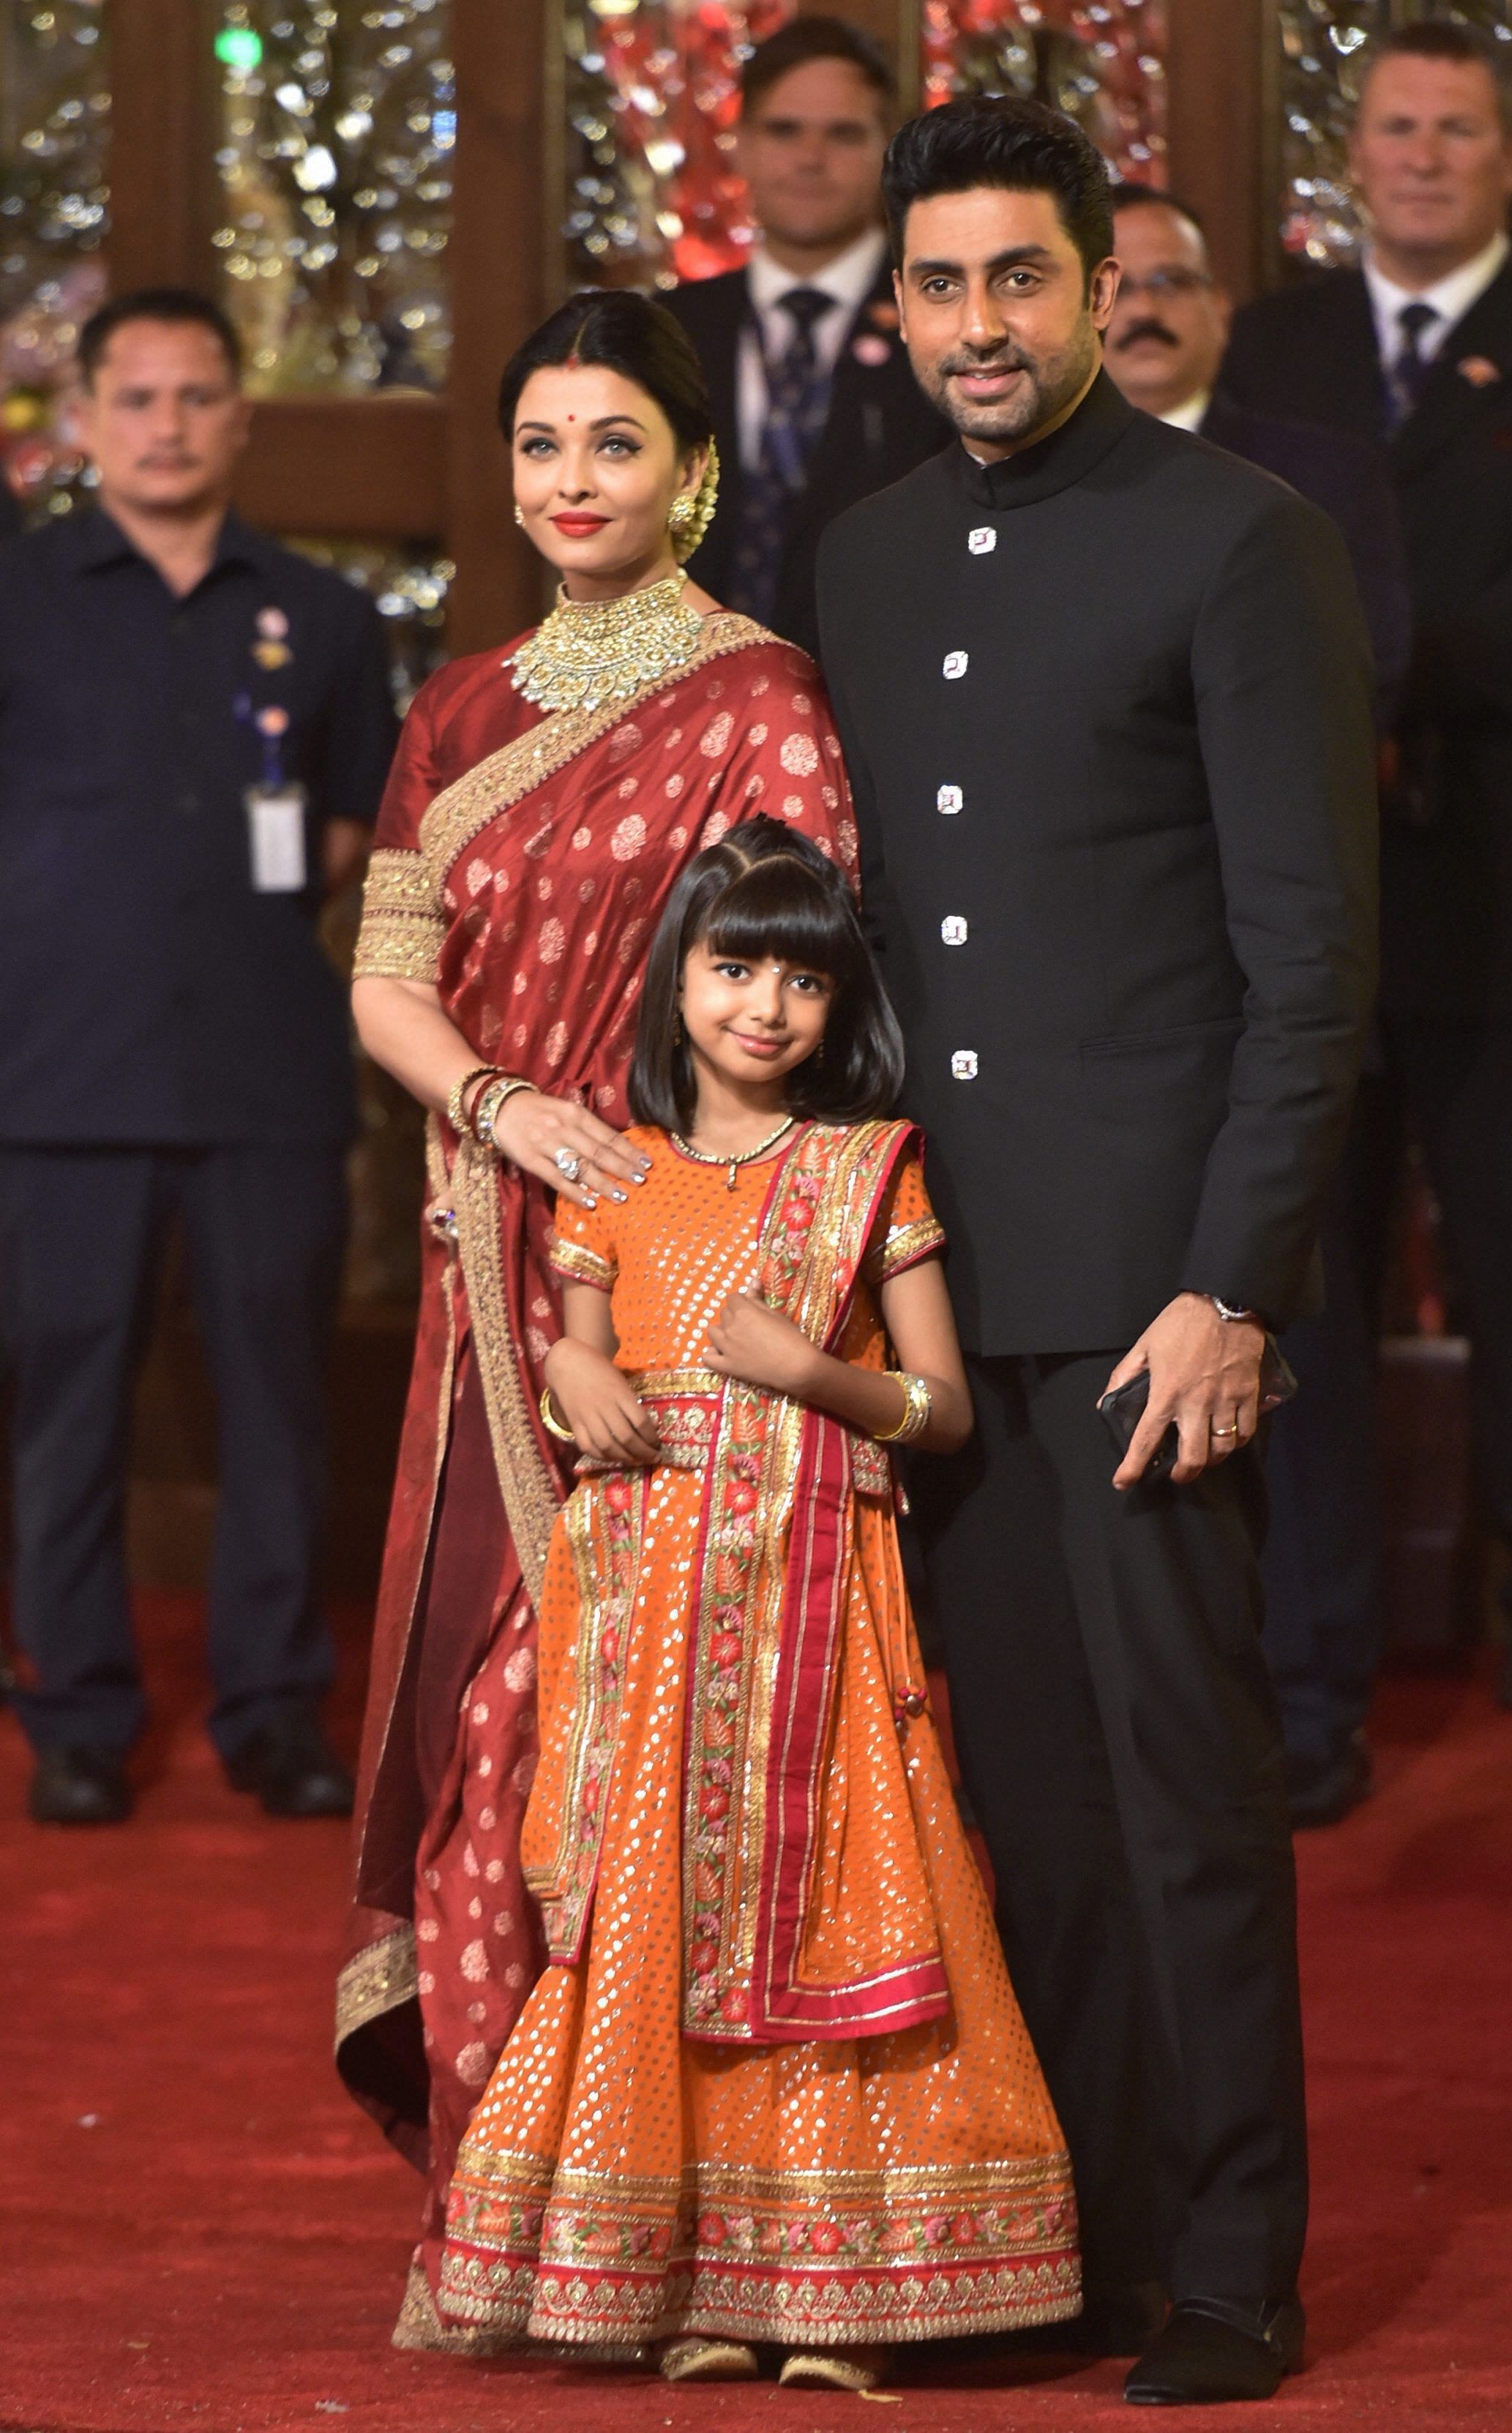 Bollywood actor Aishwarya Rai Bachchan with husband-actor Abhishek Bachchan and daughter Aaradhya arrives to attend the wedding ceremony of industrialist Mukesh Ambani's daughter. Credit: PTI